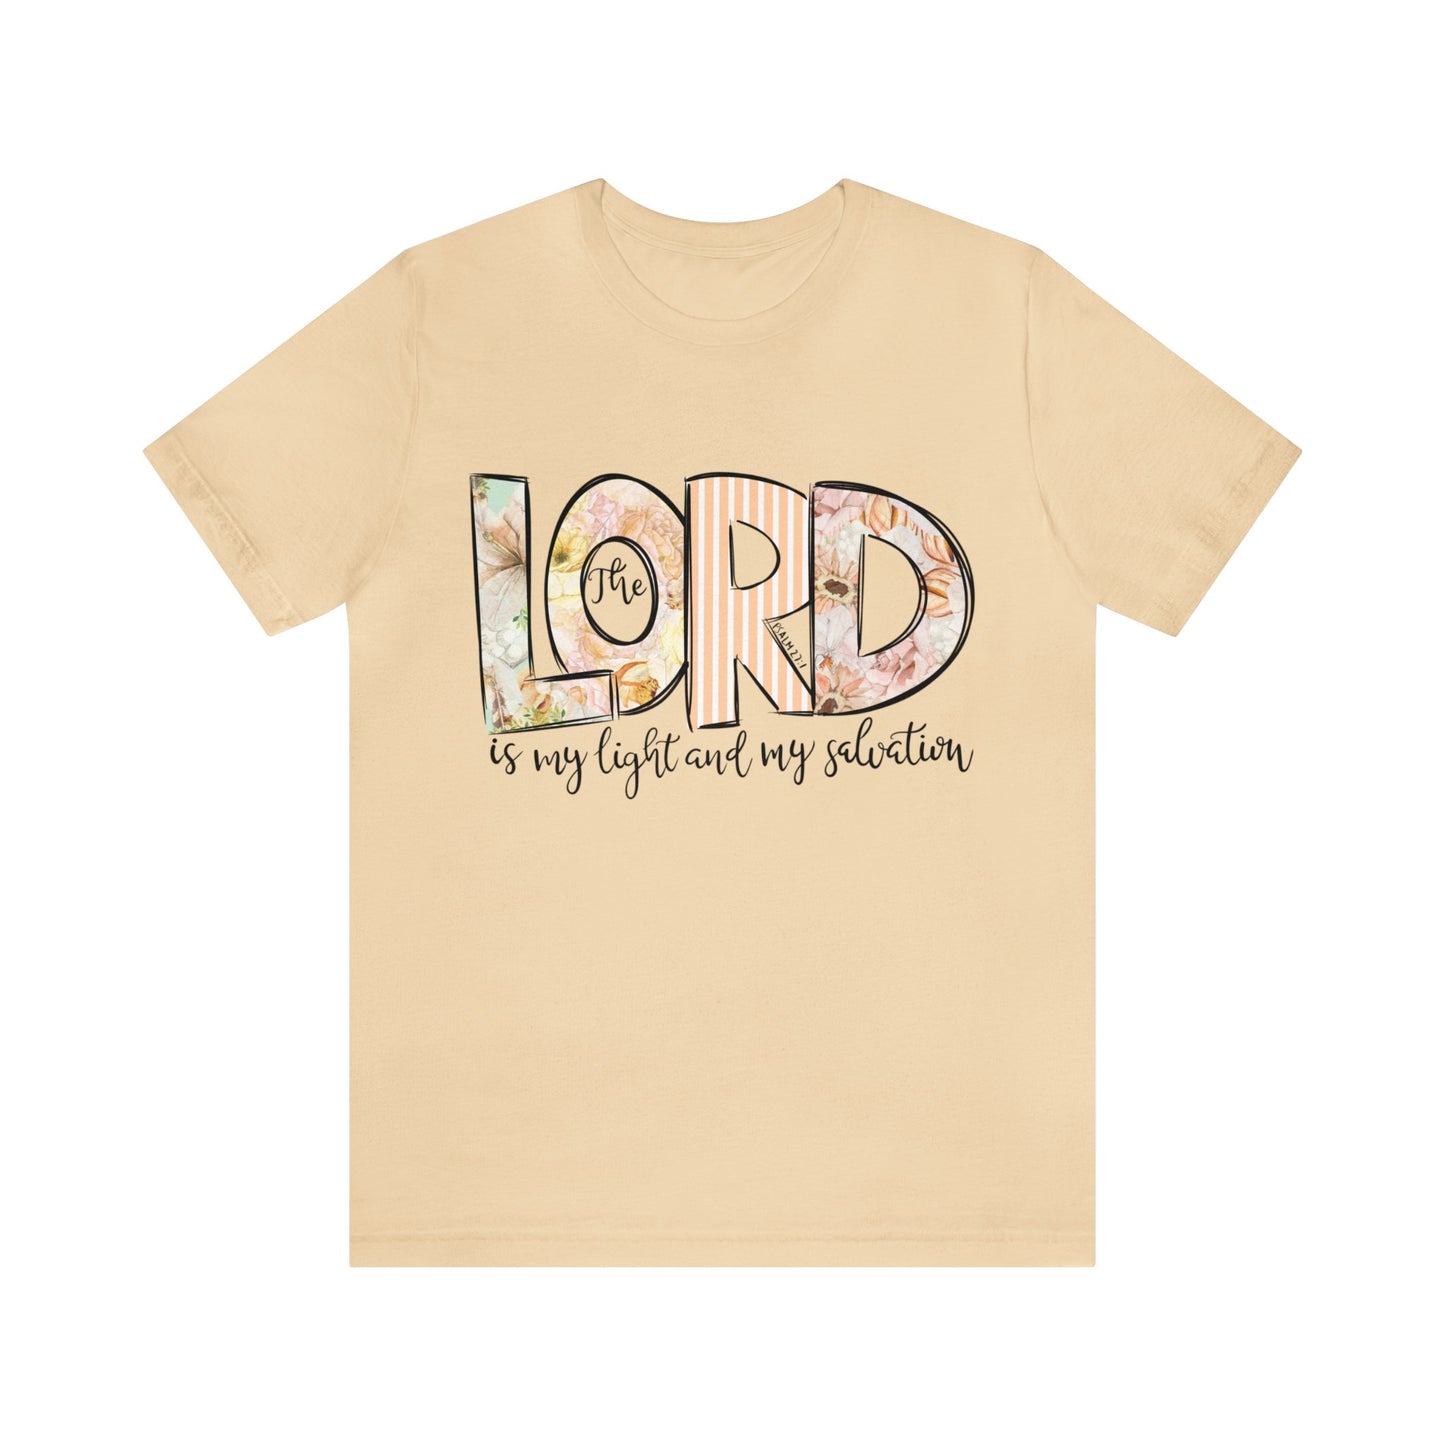 THE LORD Tee